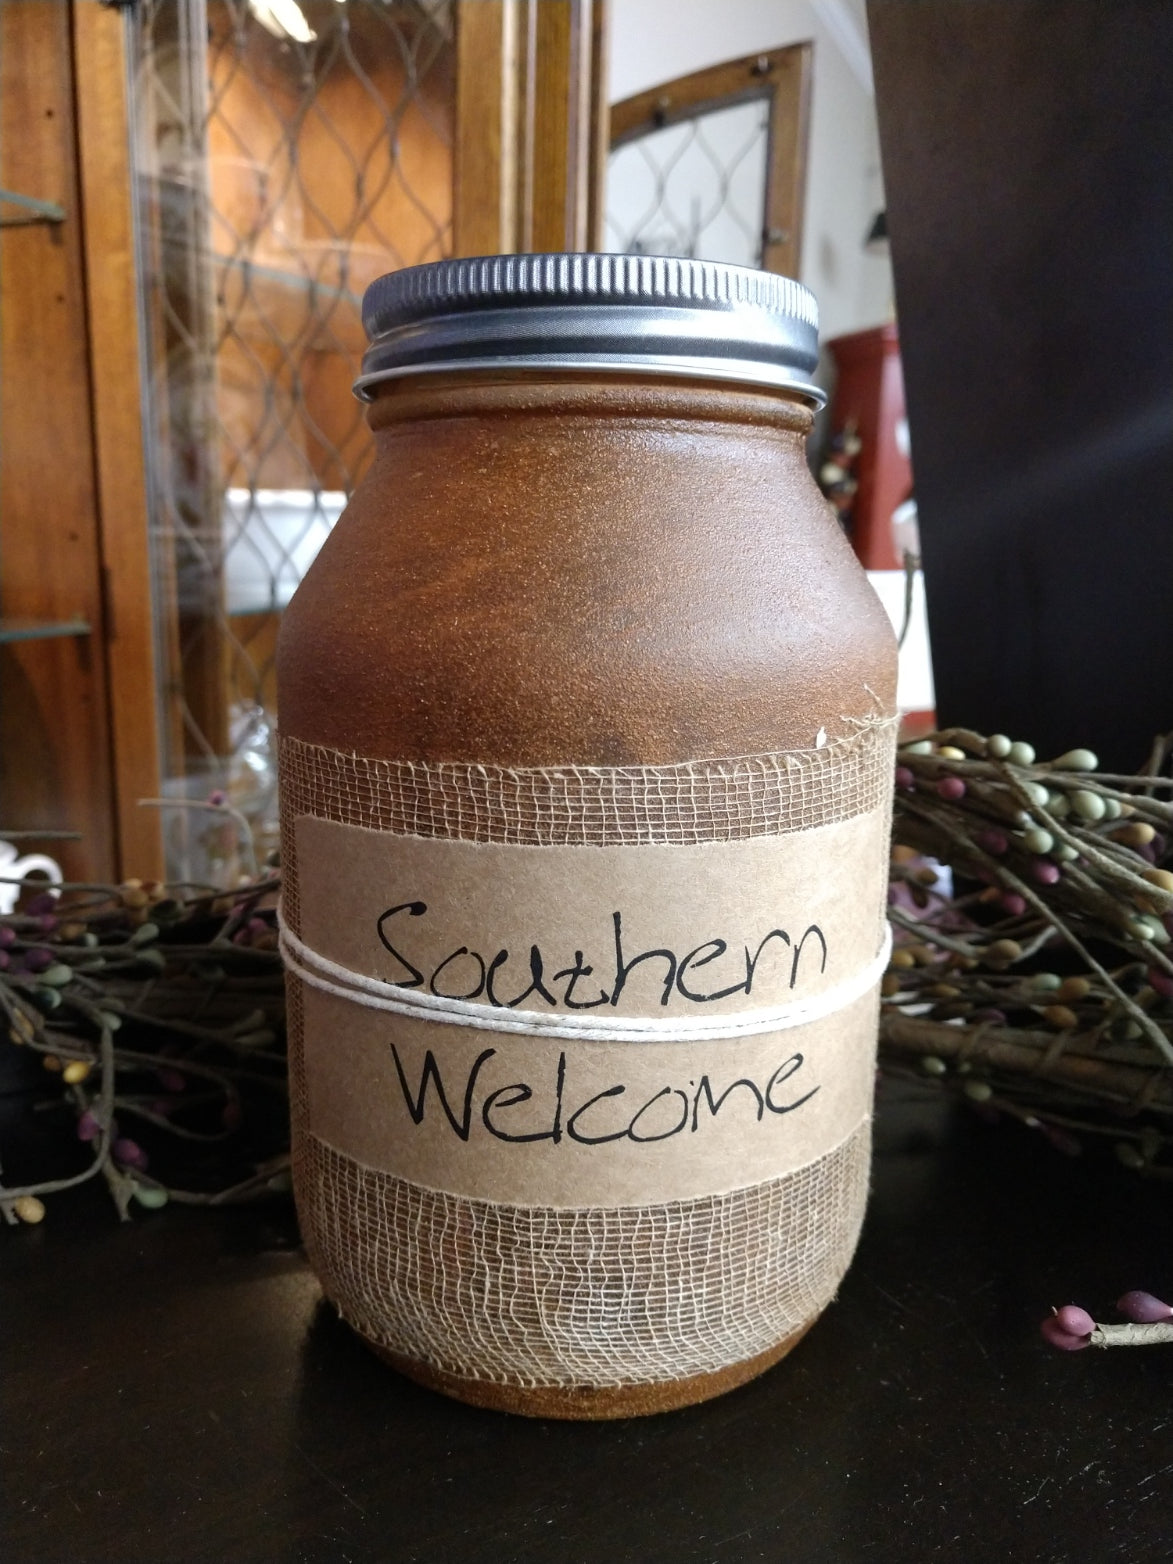 Southern Welcome